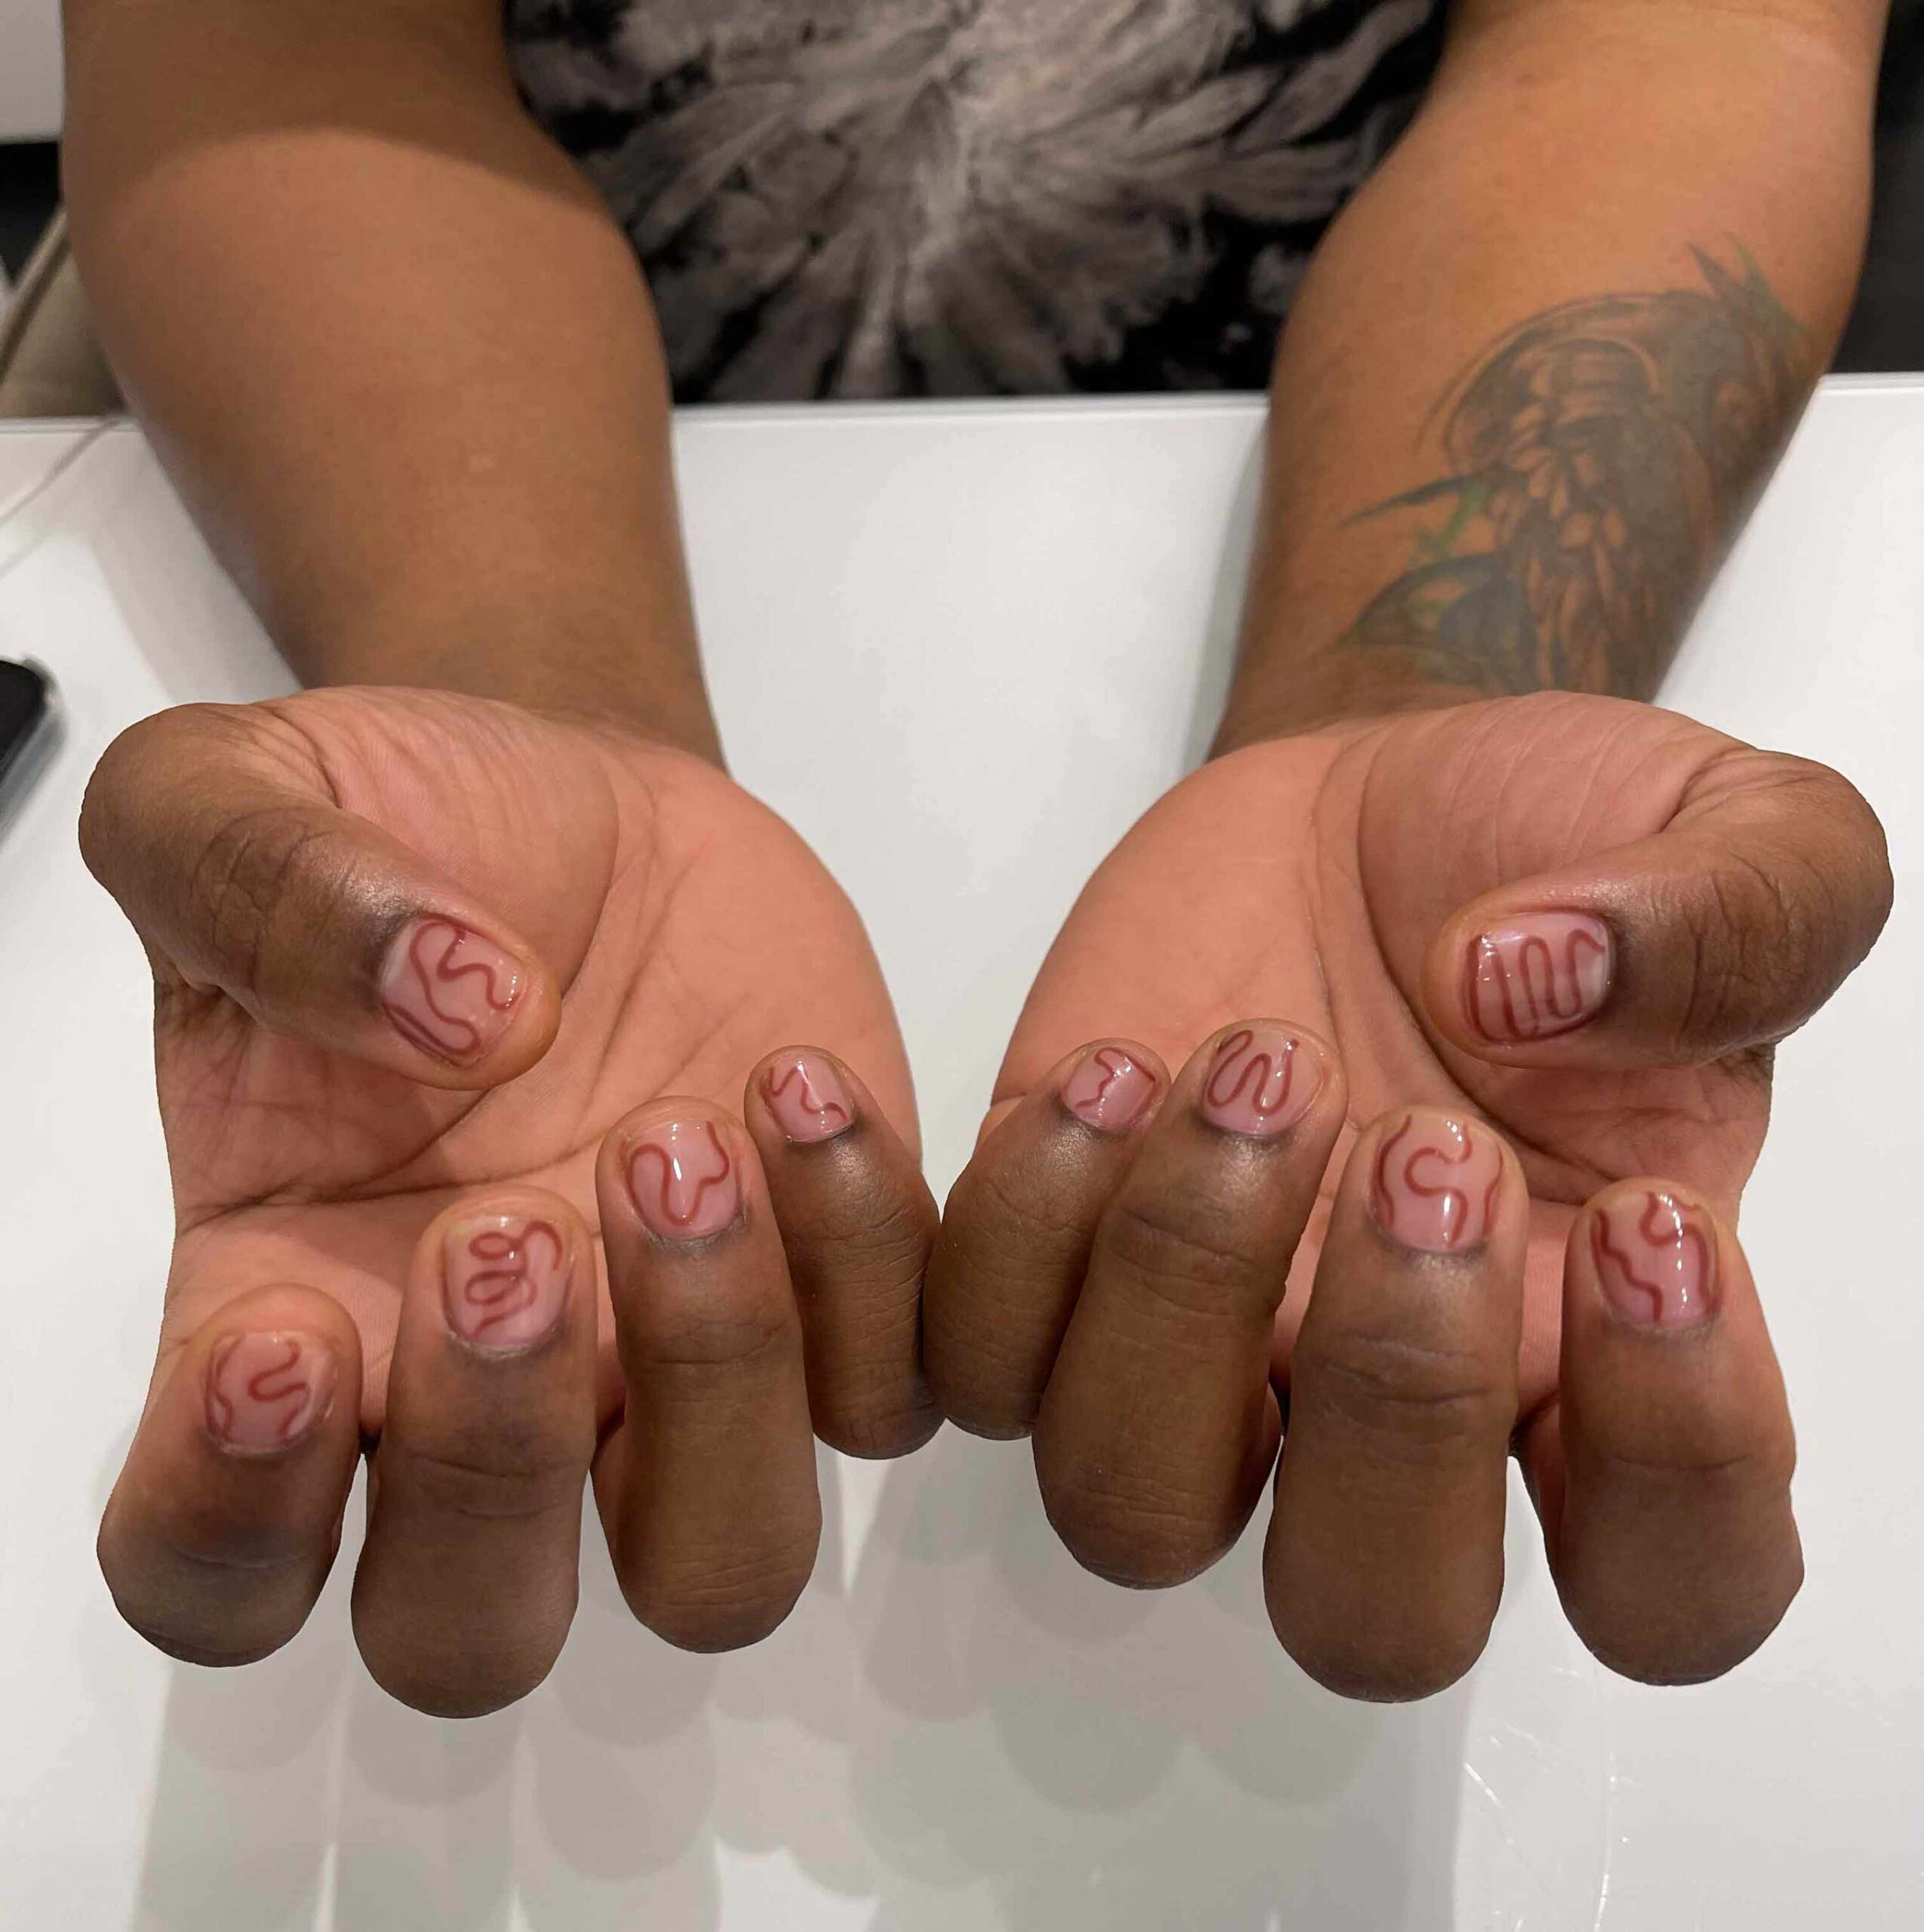 Male manicures are redefining gender-neutral beauty one coat at a time